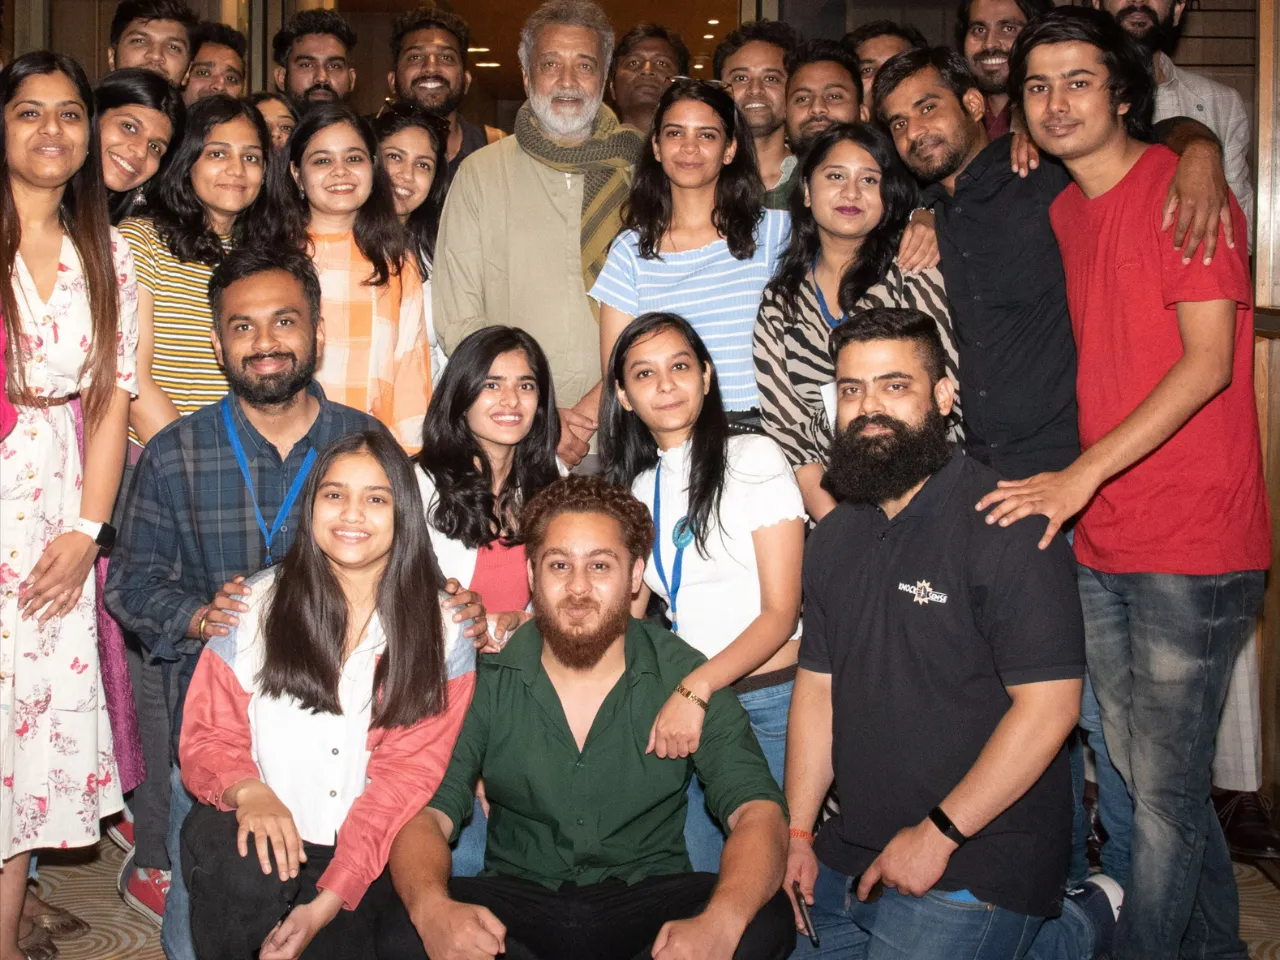 Hyperlocal content commerce startup Knocksense raises $1M in pre-Series A funding